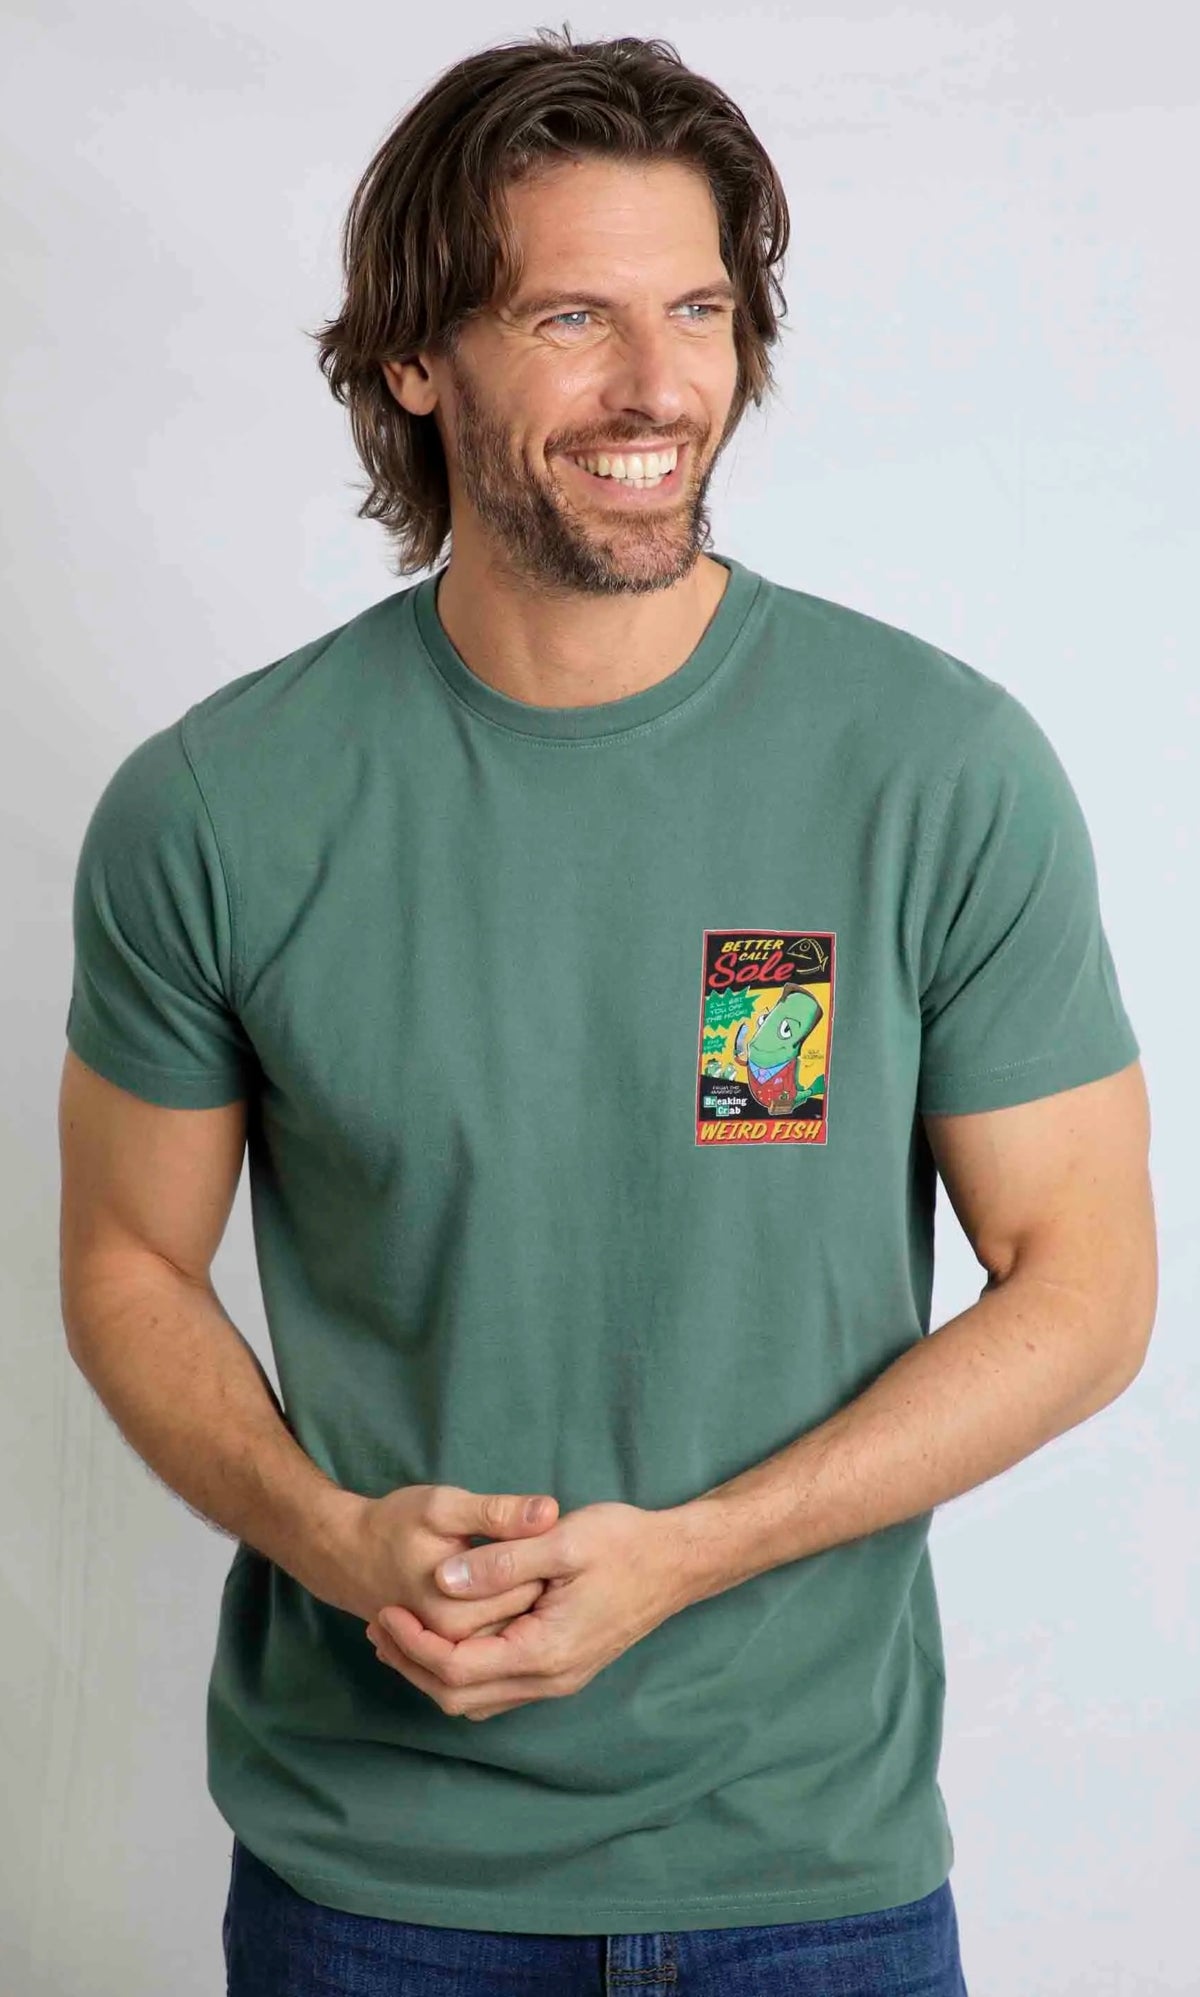 Weird Fish men's Call Sole printed short sleeve tee in Dusky Green - parody of the Better Call Saul TV show.